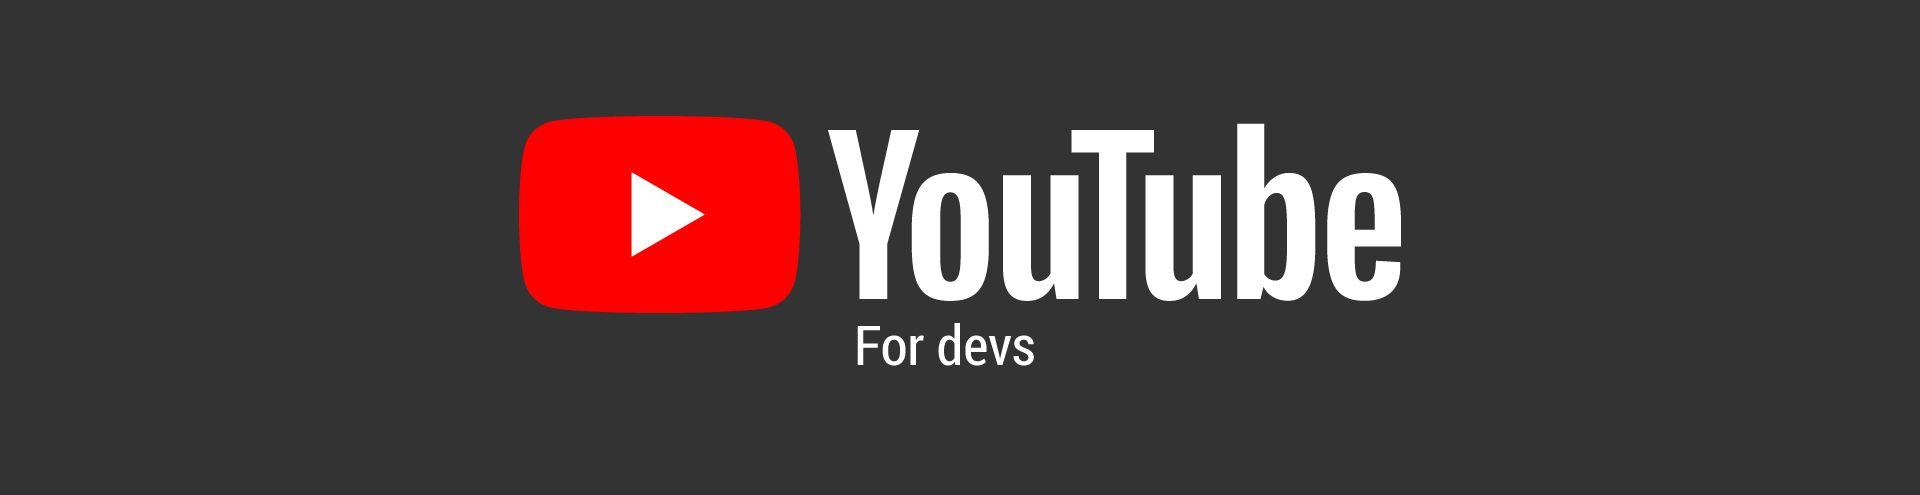 Top 7 YouTube Channels for Developers to Subscribe